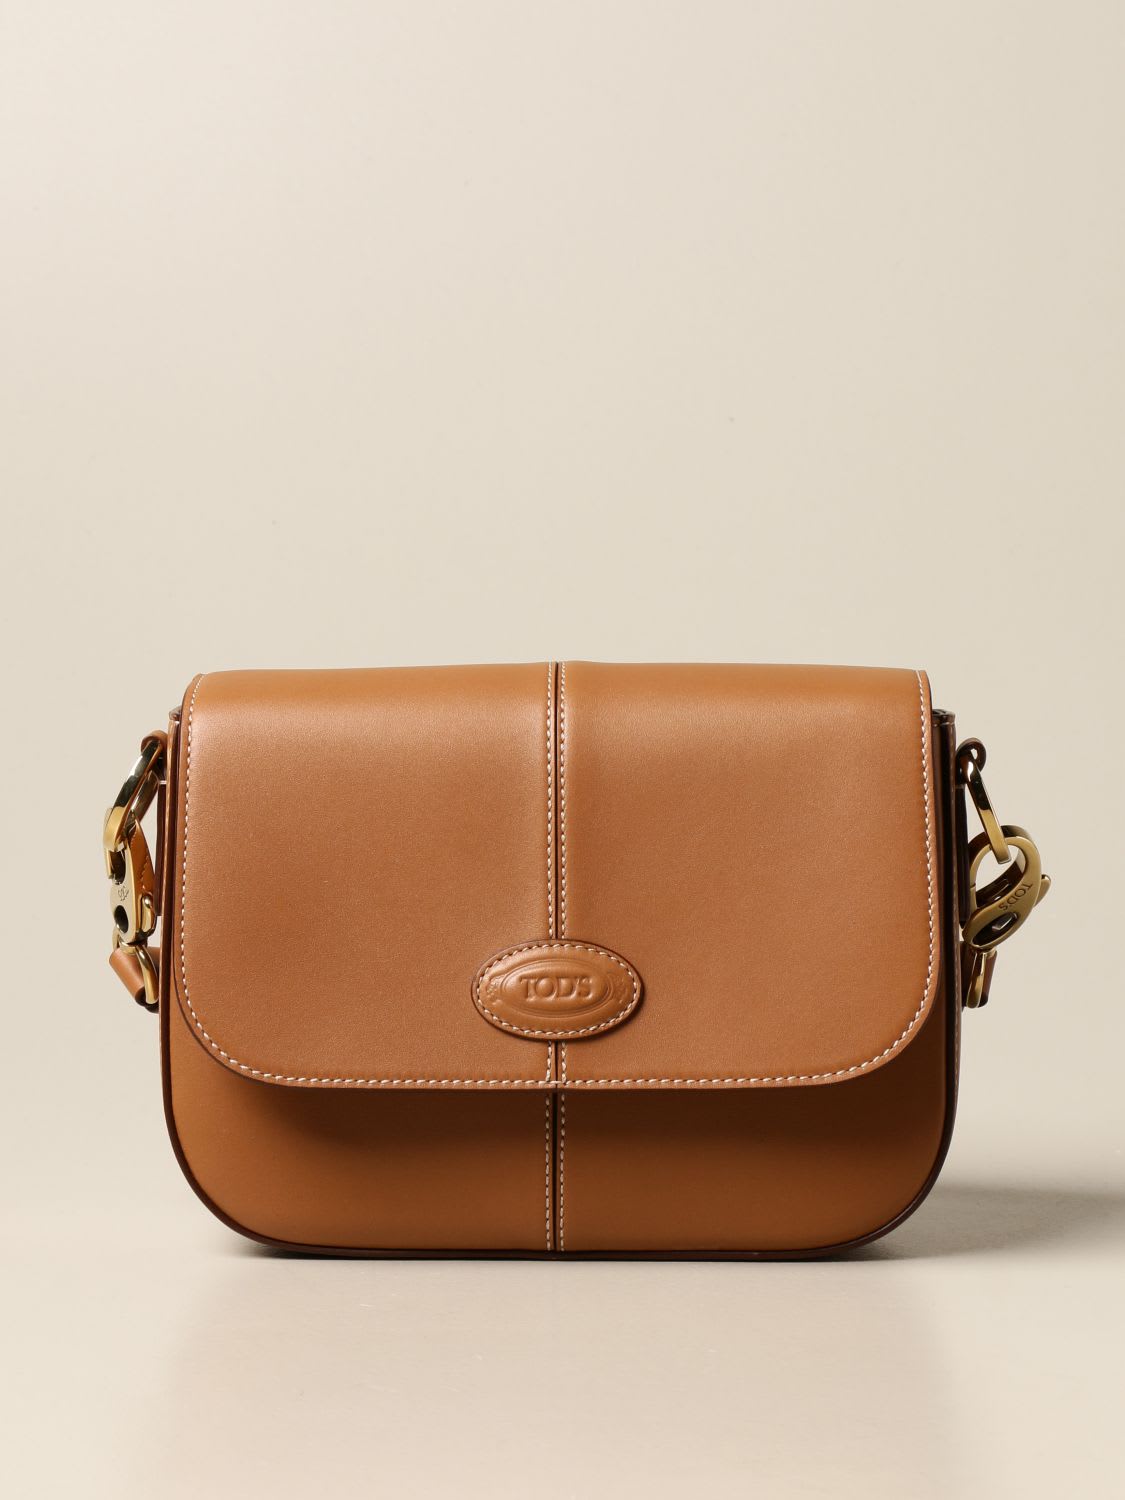 Tods Crossbody Bags Tods Leather Bag With Logo